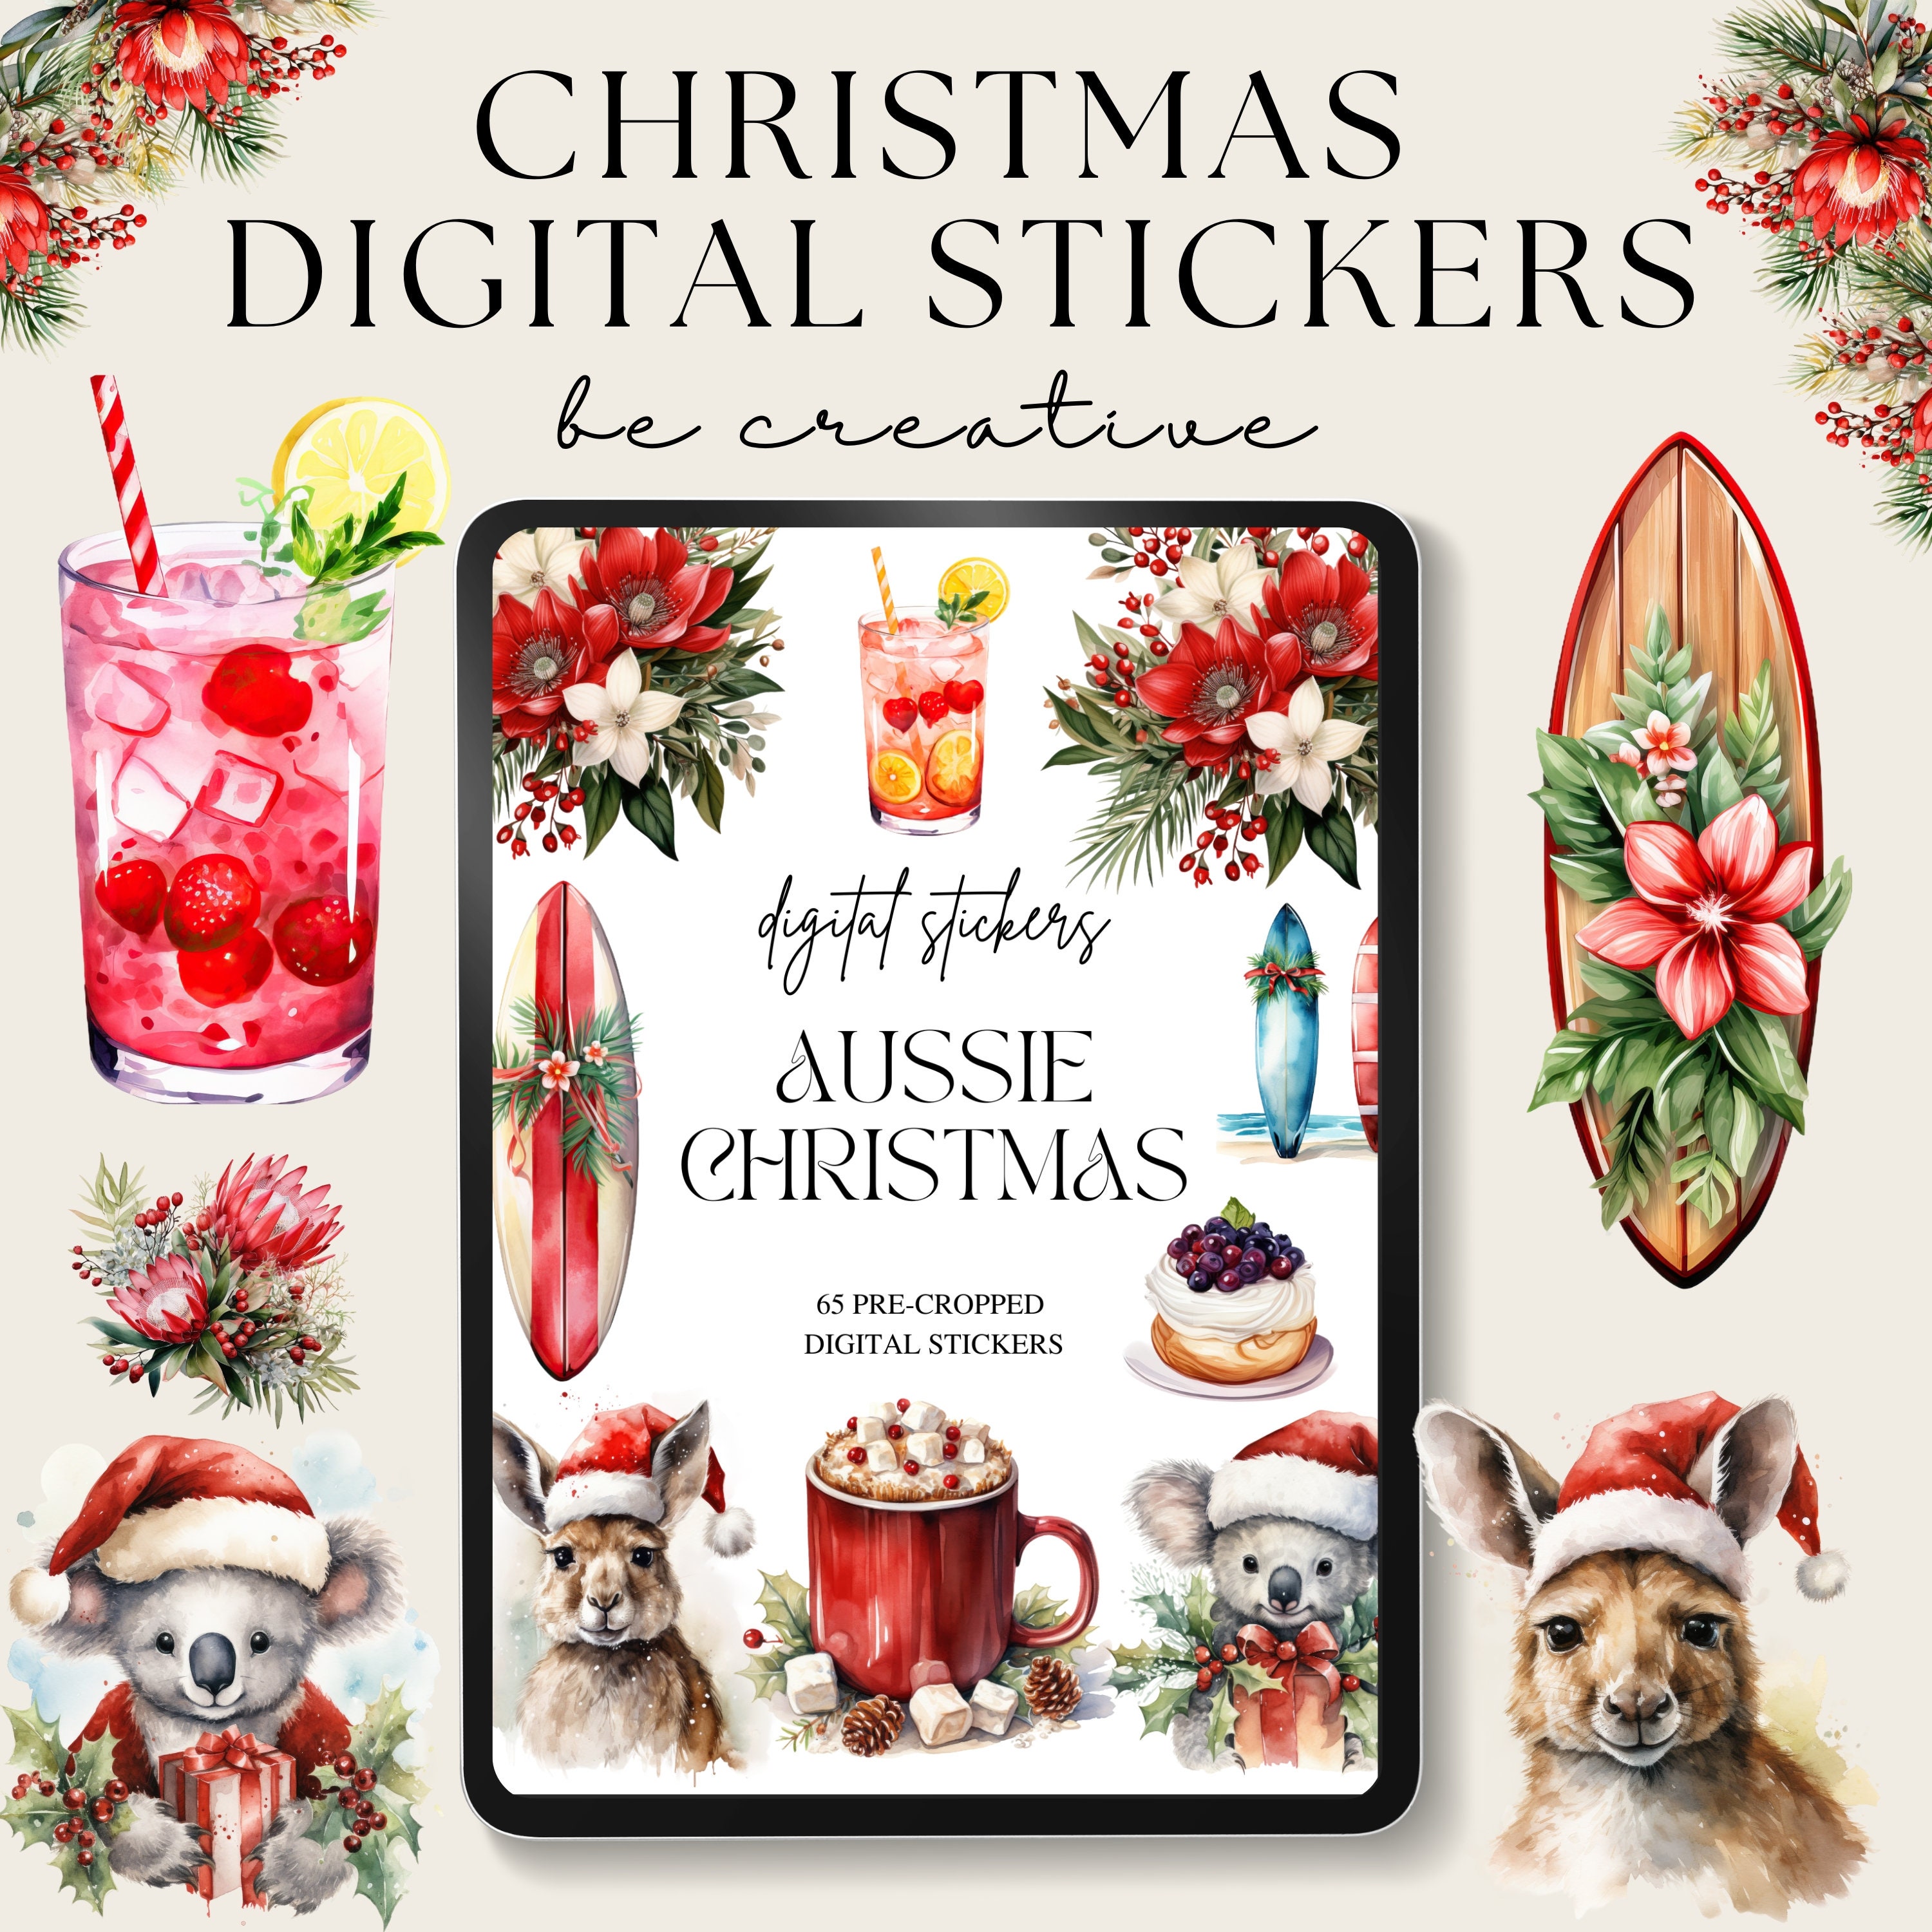 Winter Holiday Fun Stickers by Celestial Flair